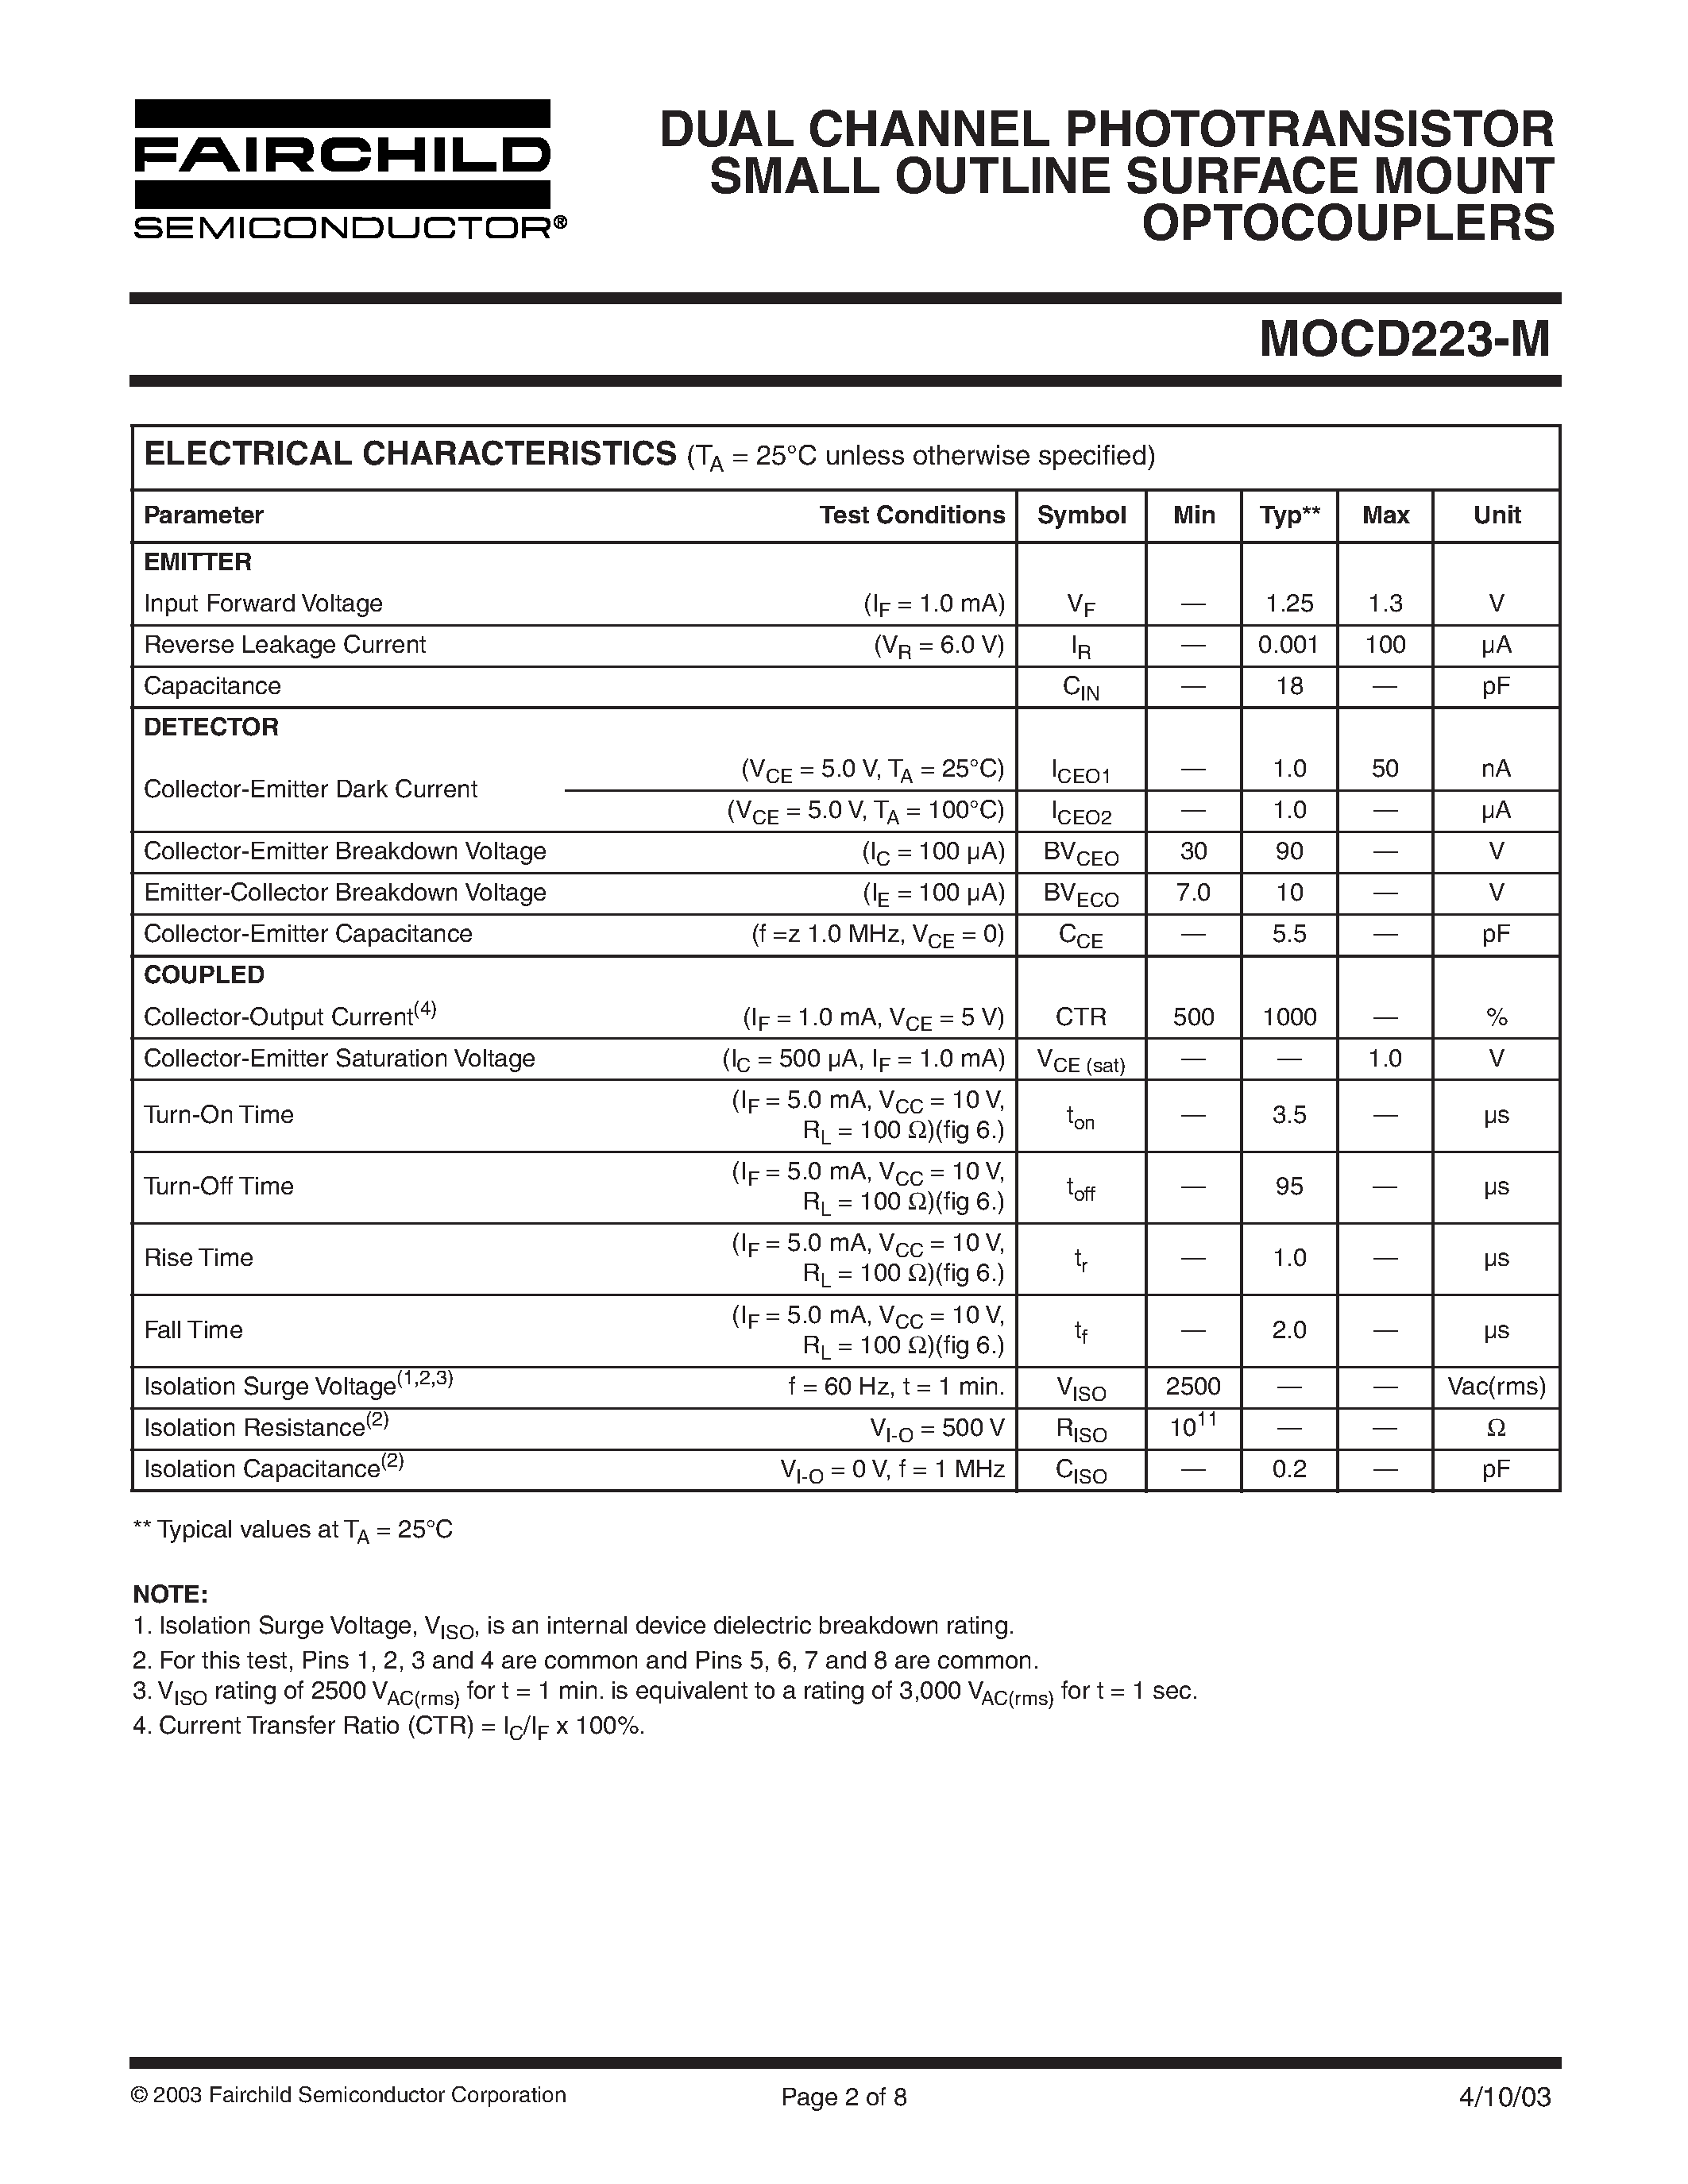 Datasheet MOCD223-M - DUAL CHANNEL PHOTOTRANSISTOR SMALL OUTLINE SURFACE MOUNT OPTOCOUPLERS page 2